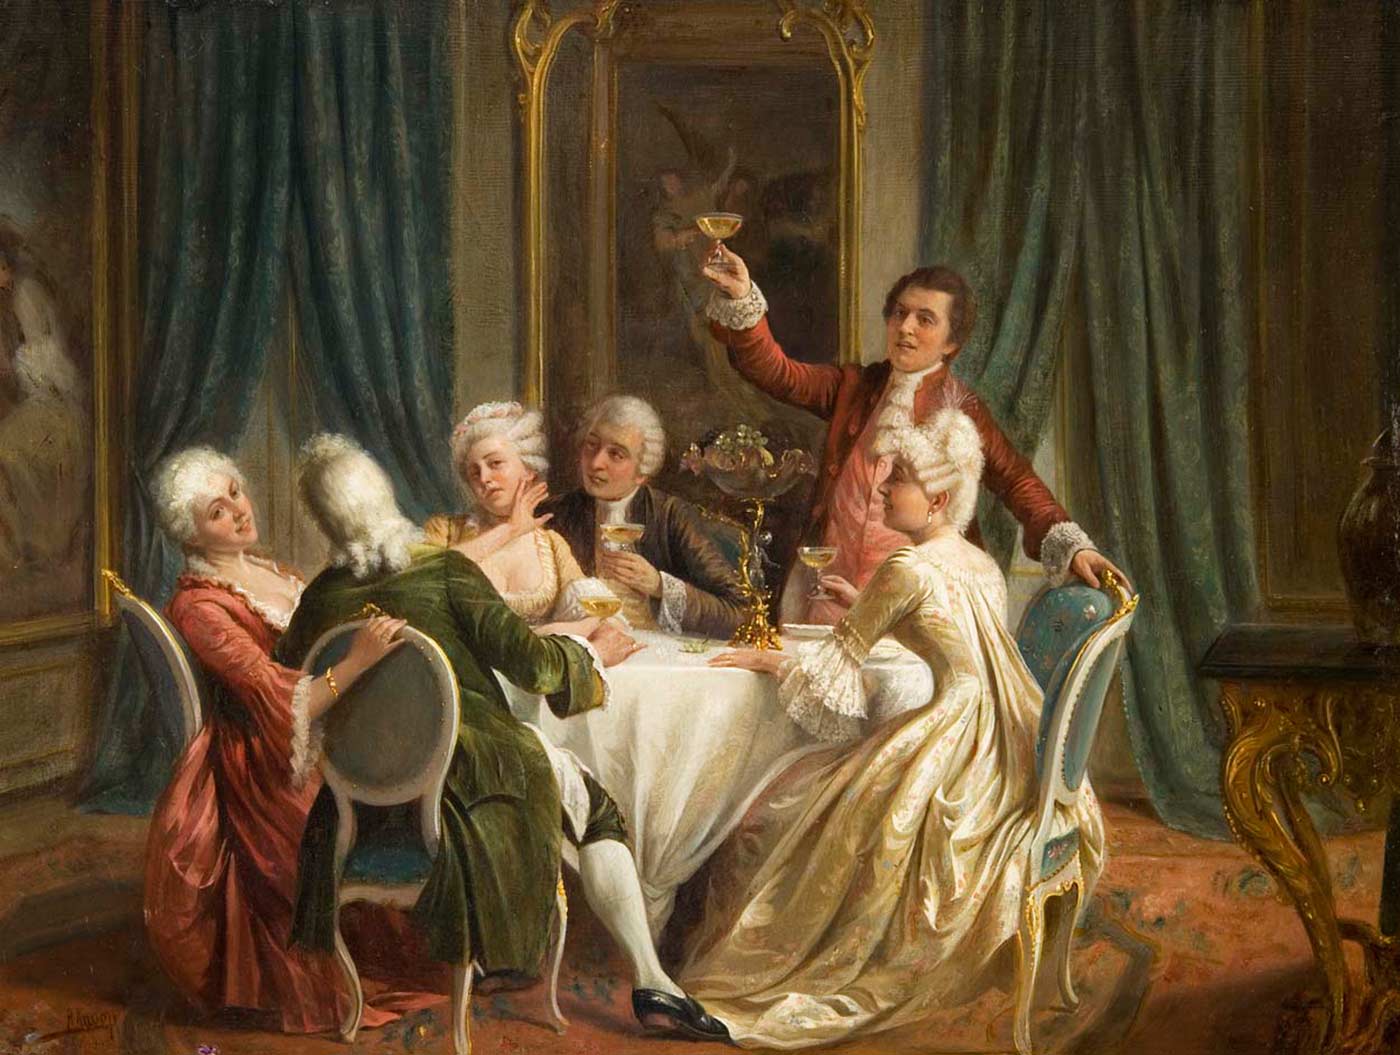 "A Toast," by August Hermann Knoop, 1919.